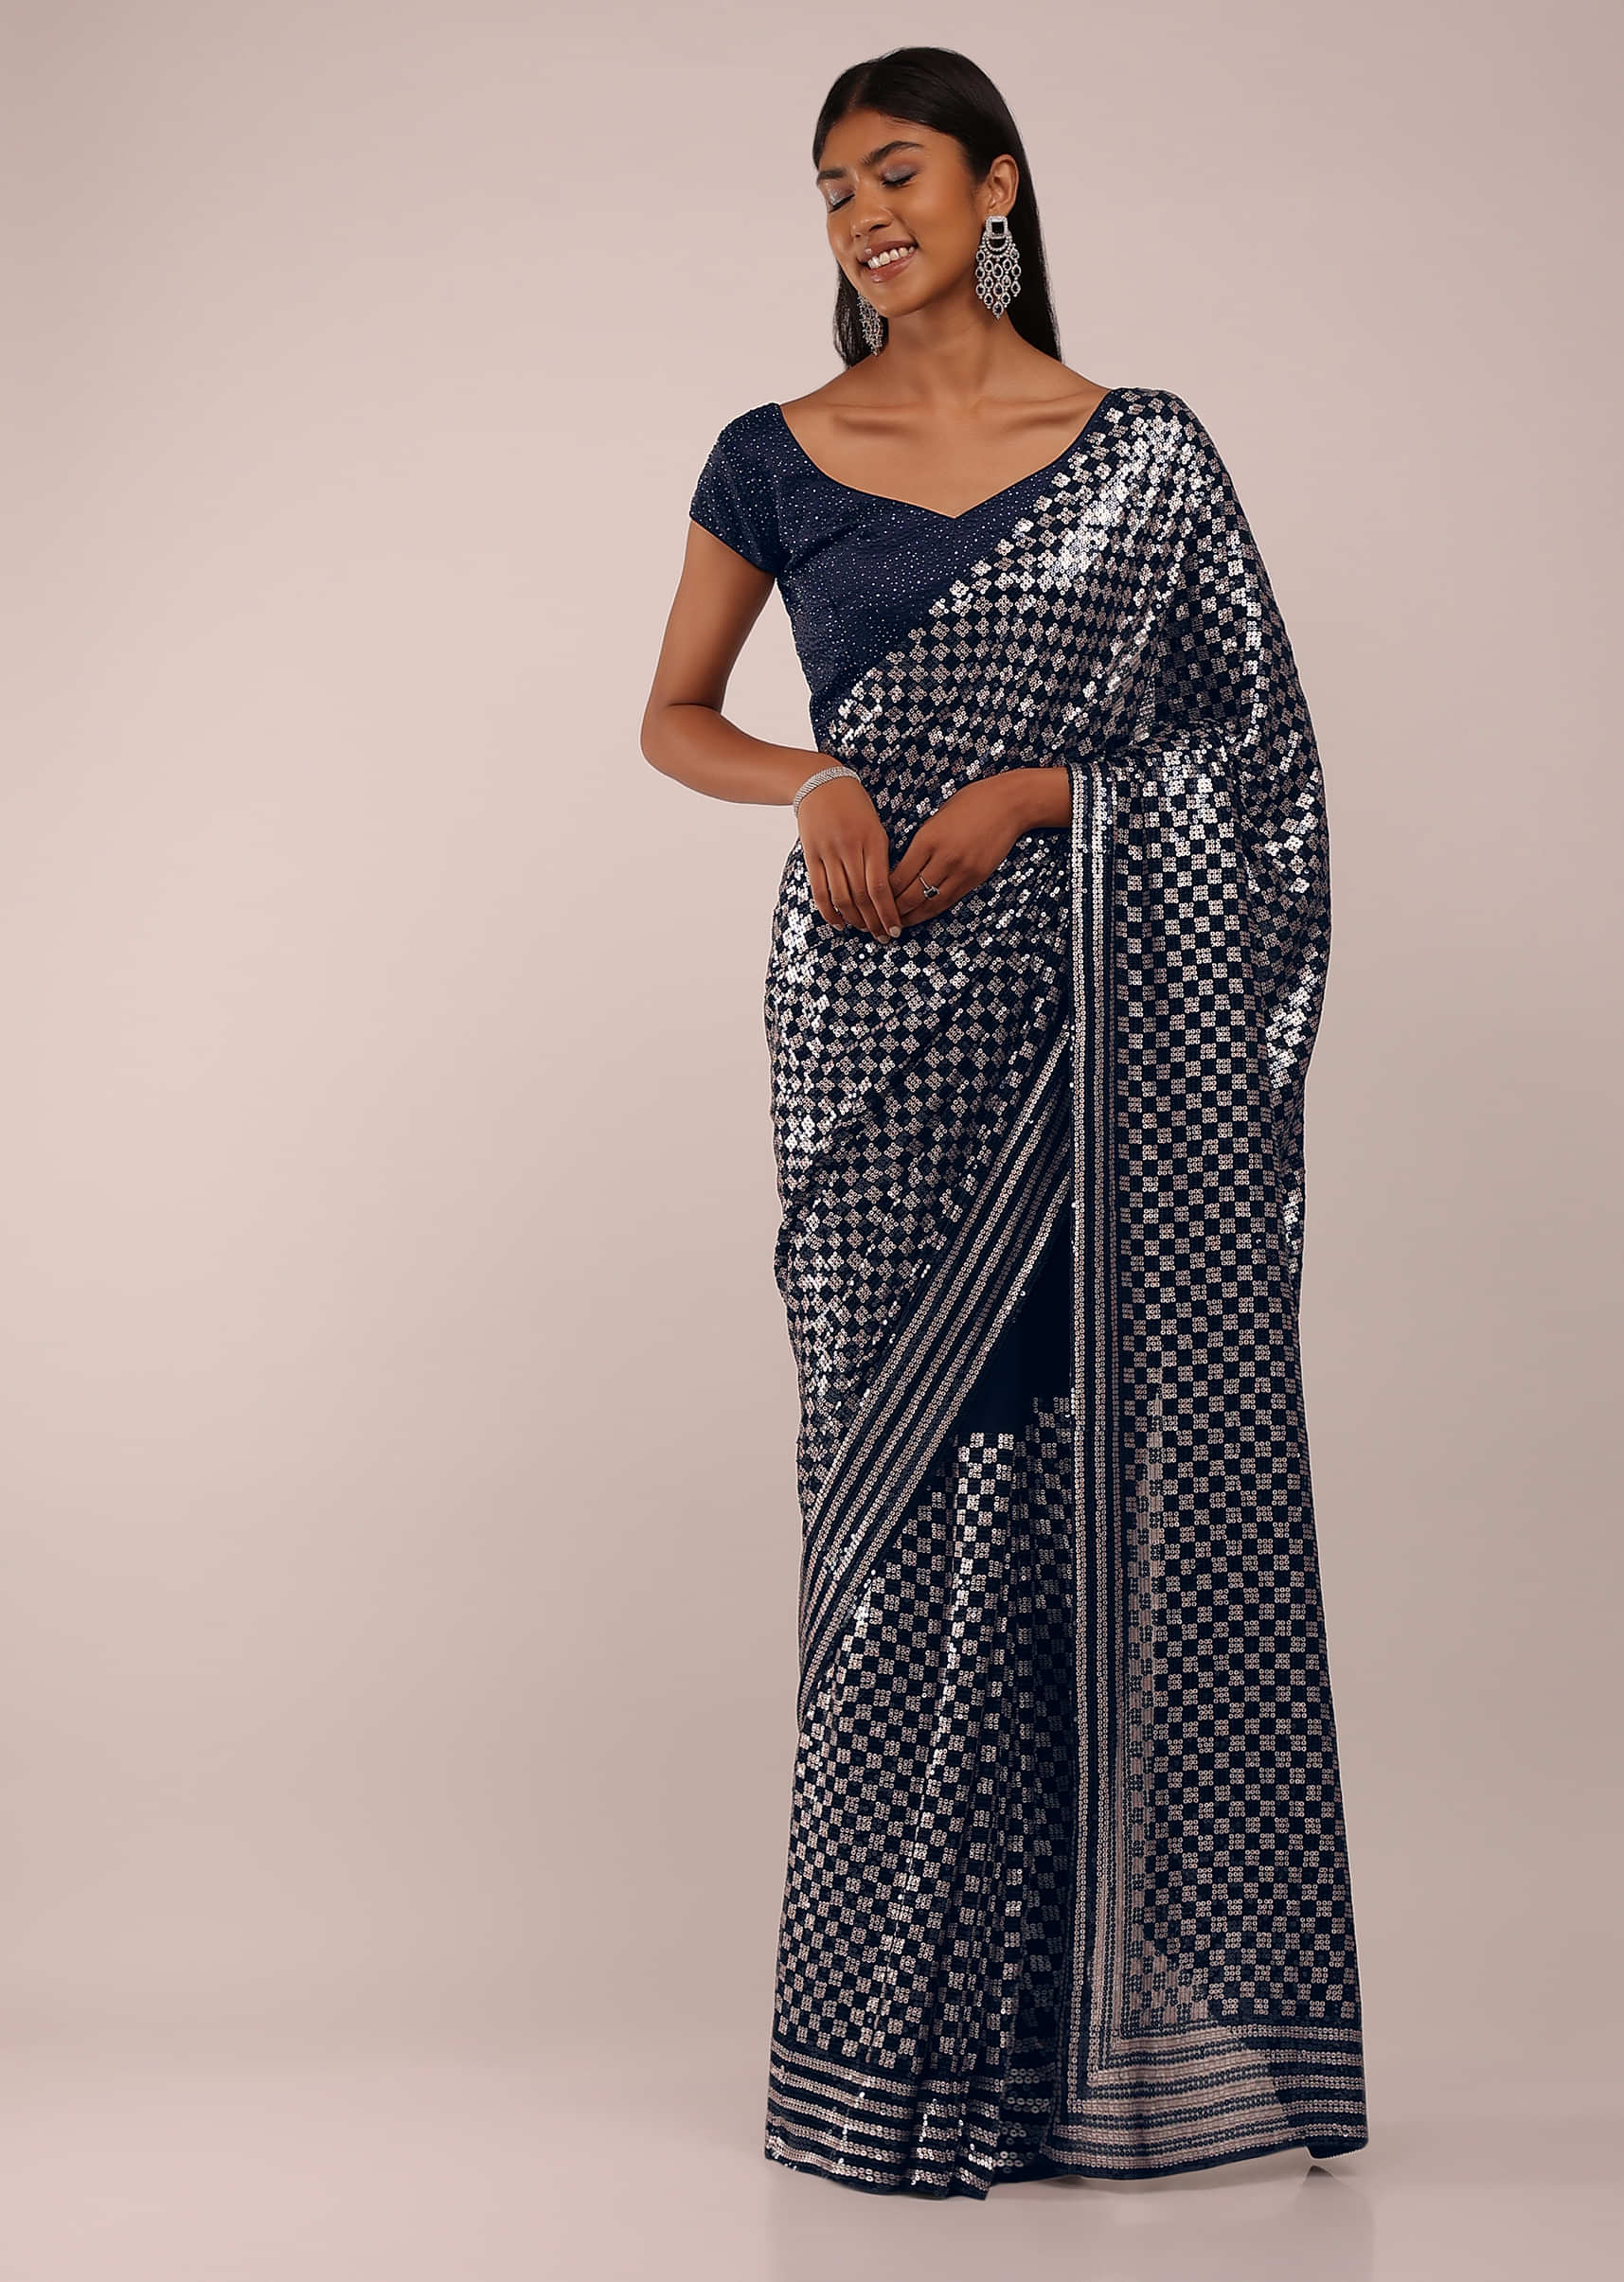 Midnight Blue Chiffon Saree In Blue And Black Sequins Embroidery In Geometrical Motifs In A Checks Jaal